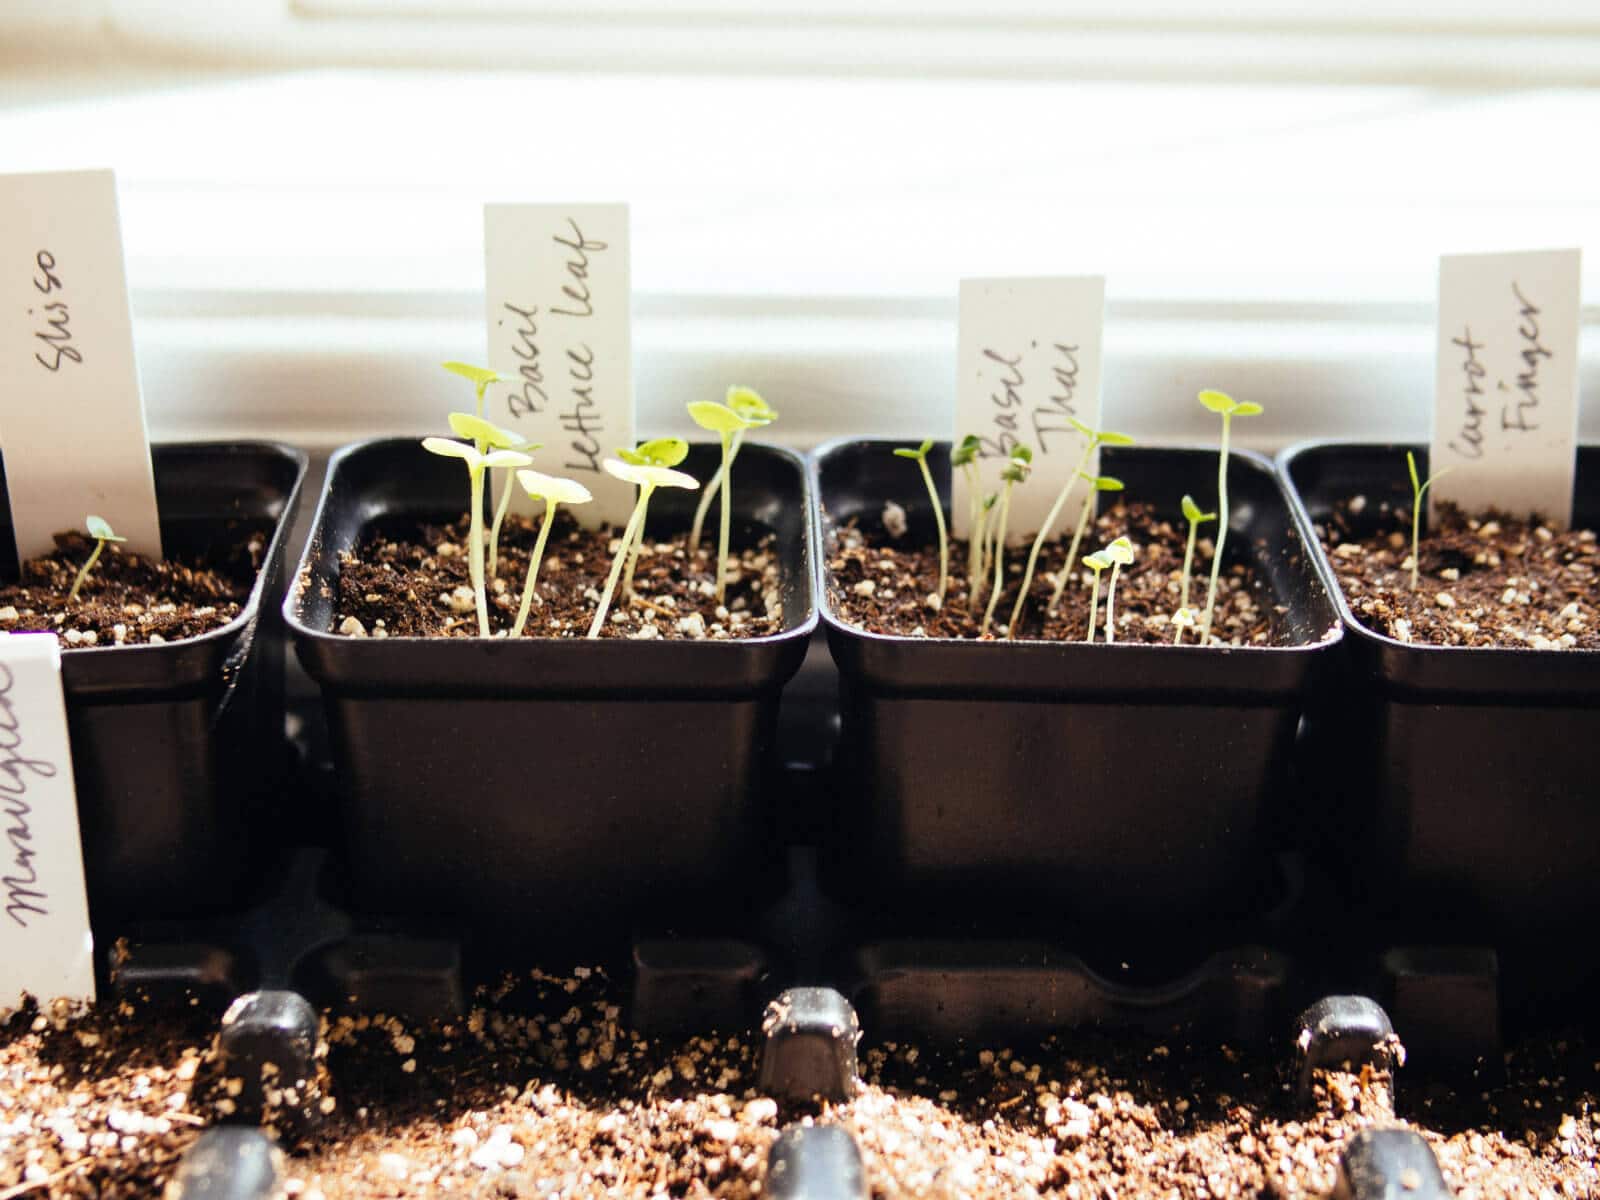 The no-brainer guide to starting seeds indoors